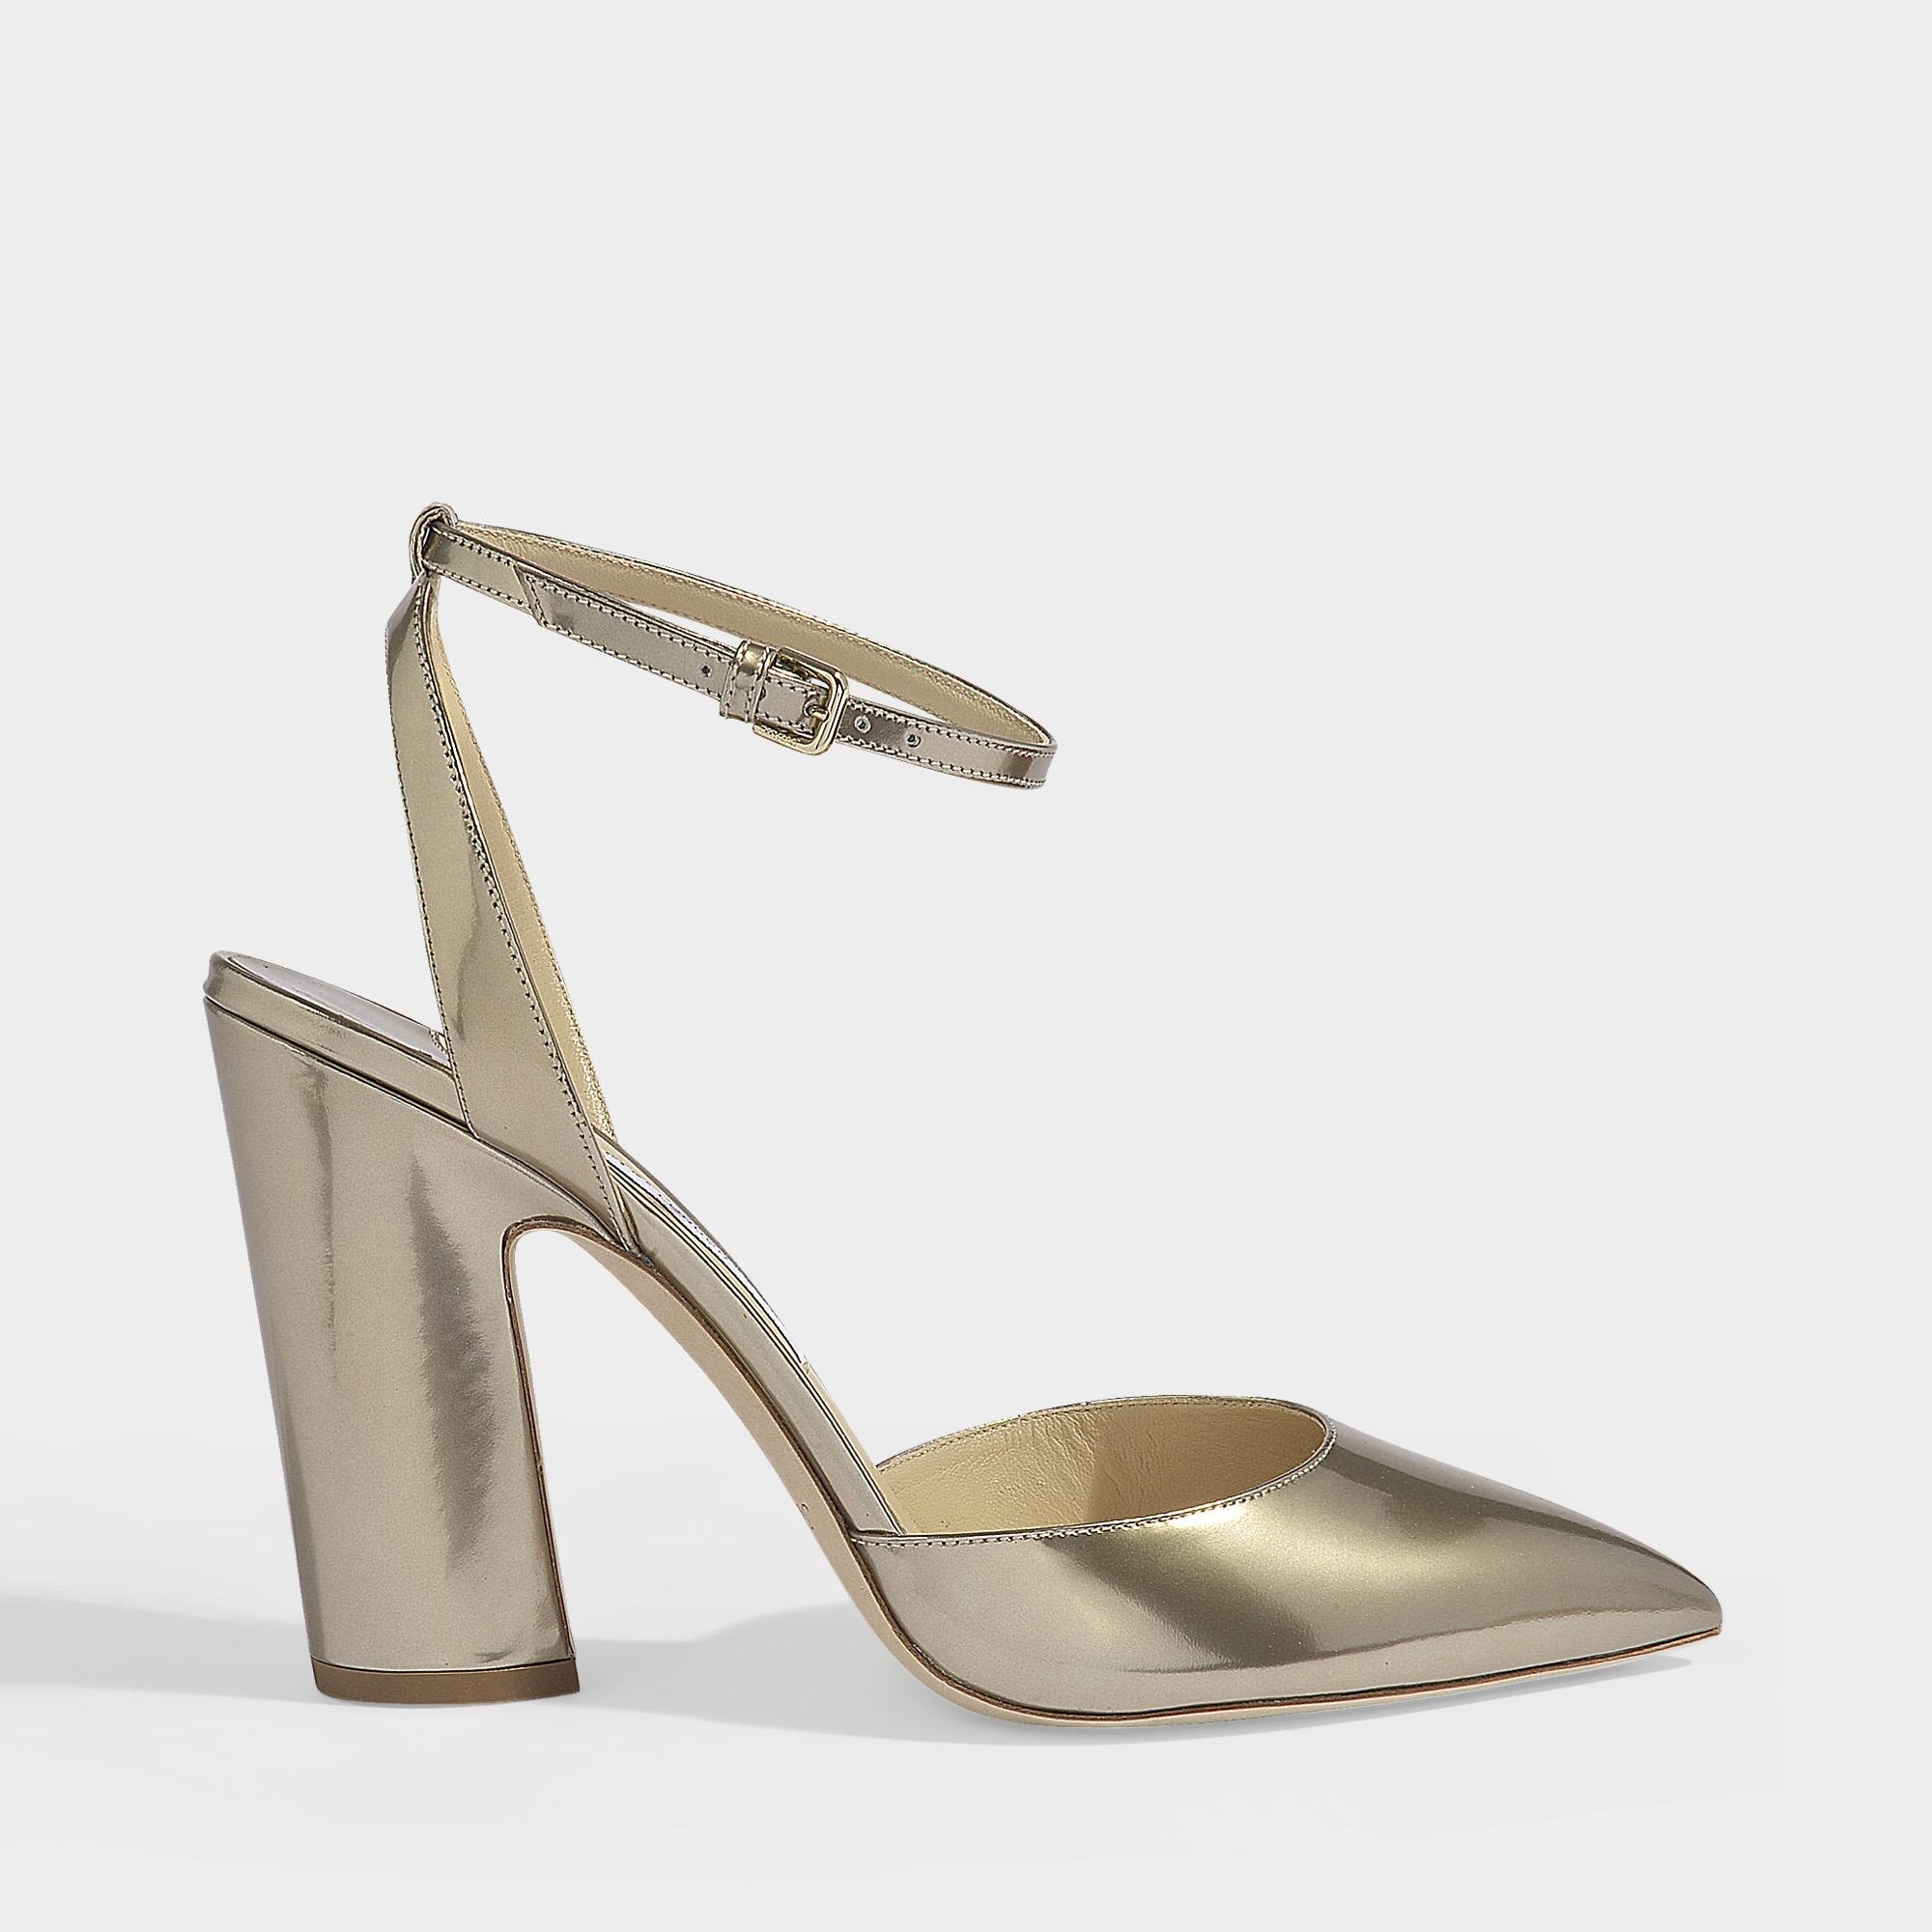 Jimmy Choo Micky 100 Pumps In Gold Liquid Mirror Leather in Yellow - Lyst